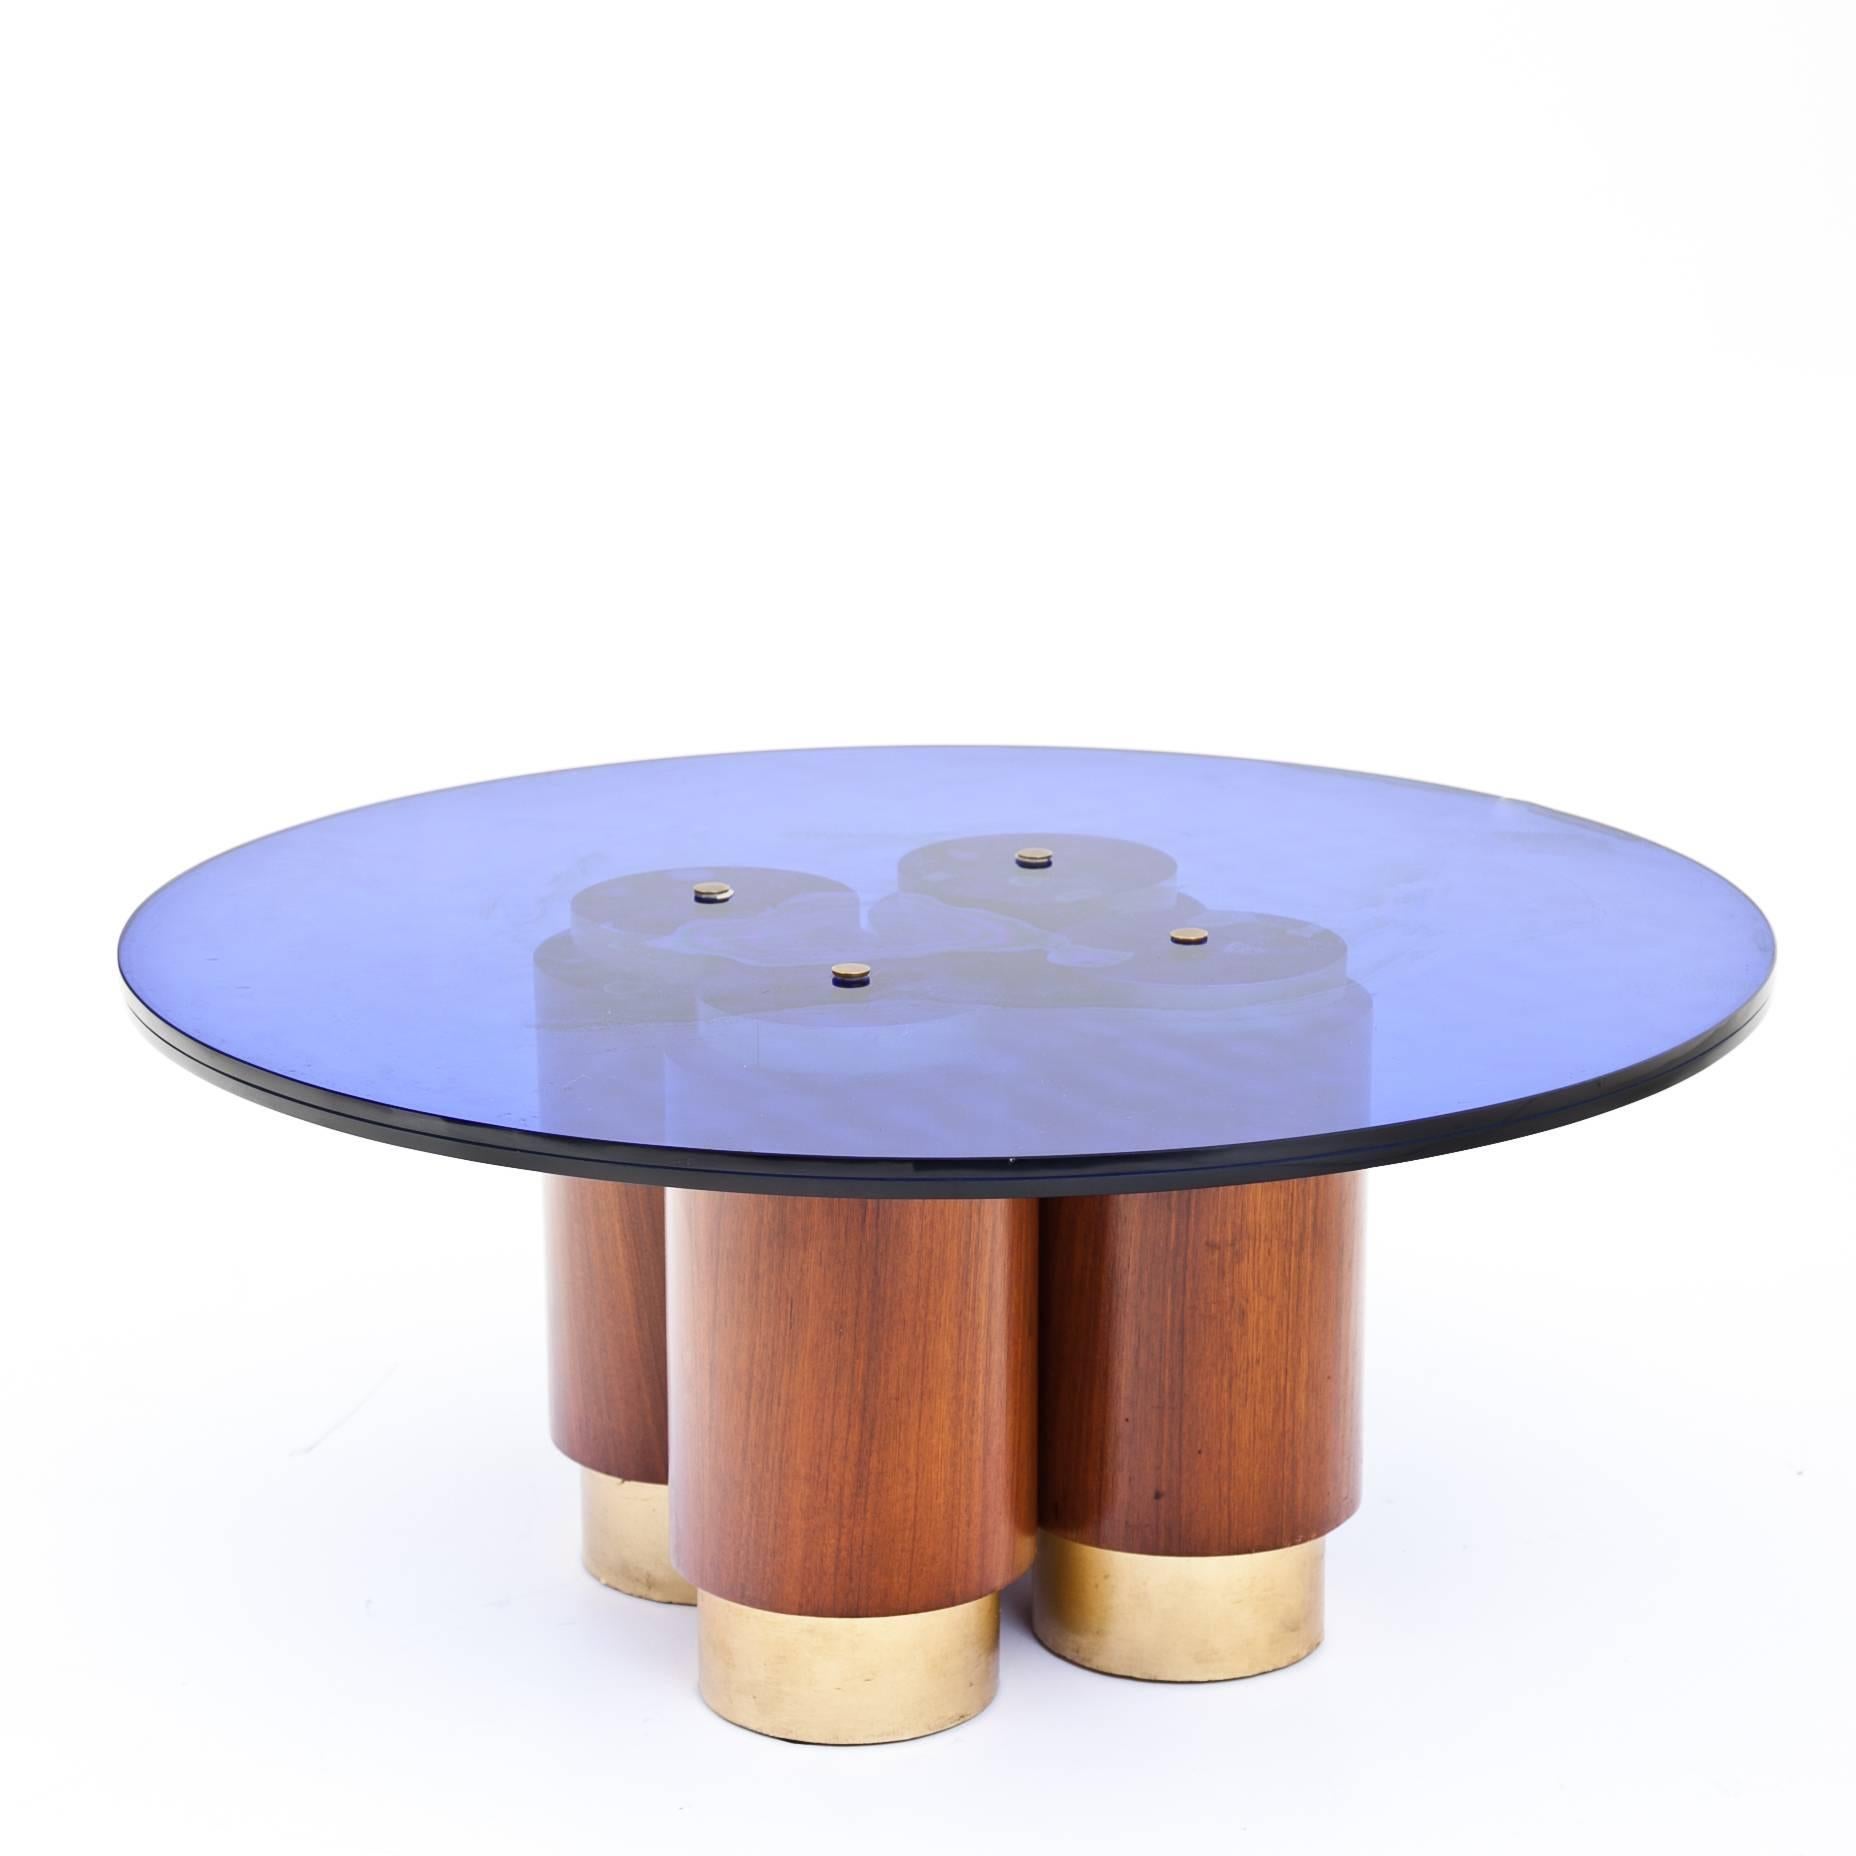 Round coffee table on four separate cylindrical legs with brass colored bases. The cobalt blue tabletop shows signs of age and use.